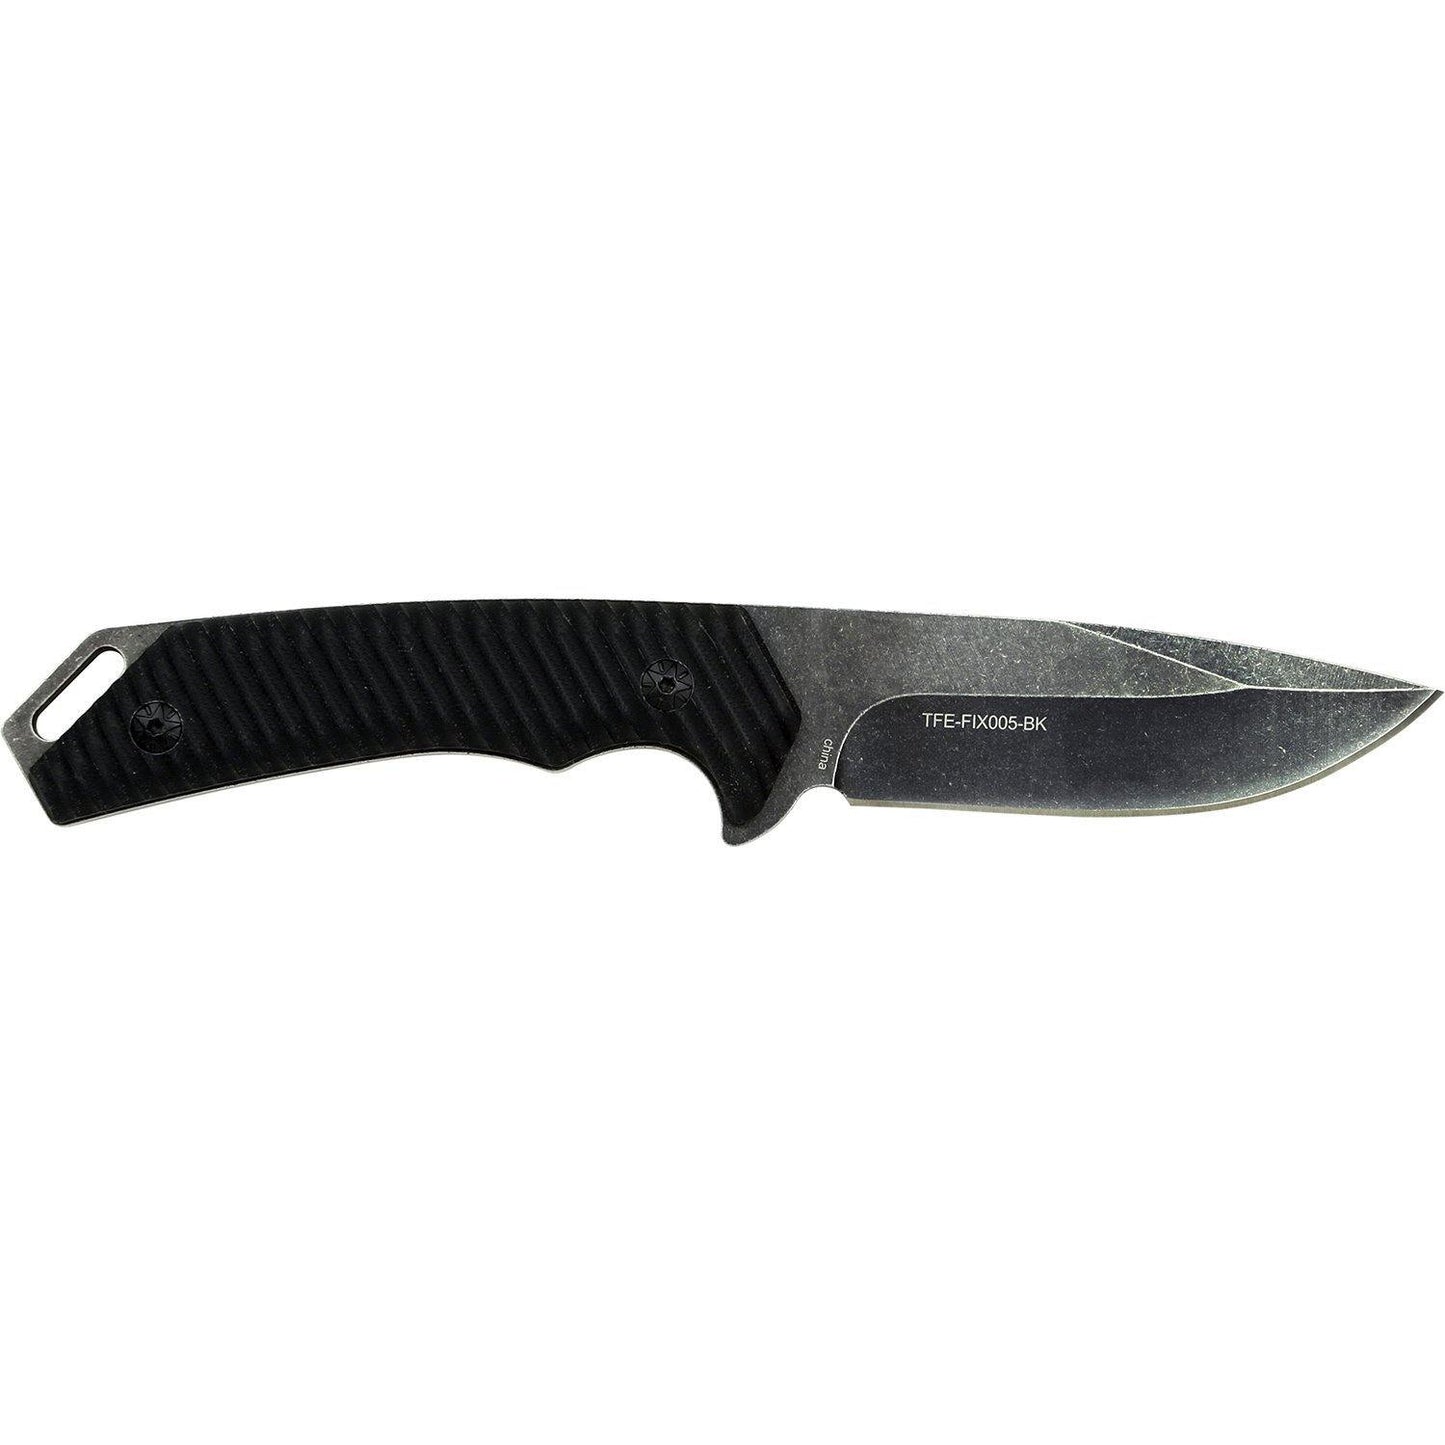 Tac-Force Evolution Drop Point Stonewashed Finish Tactical Fixed Blade Knife - 9 Inches Full Tang #tfe-Fix005-Bk - Xhunter New Zealand